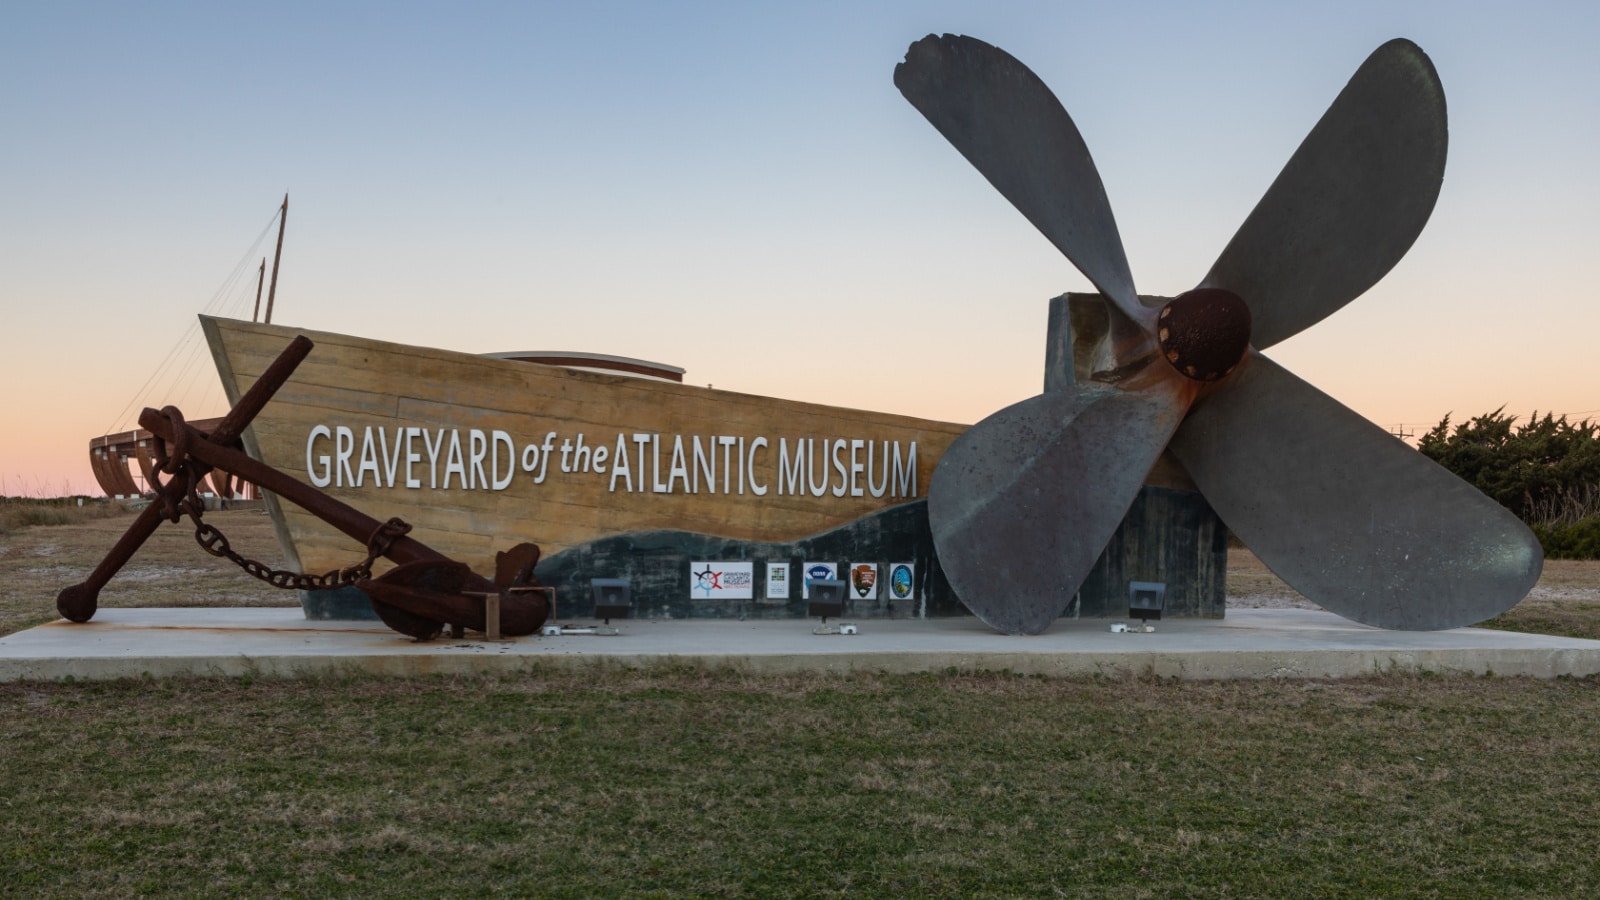 HATTERAS, NC USA - JANUARY 12, 2022: Sign for the Graveyard of the Atlantic, a landmark maritime museum focusing on history and shipwrecks of the Outer Banks of North Carolina.